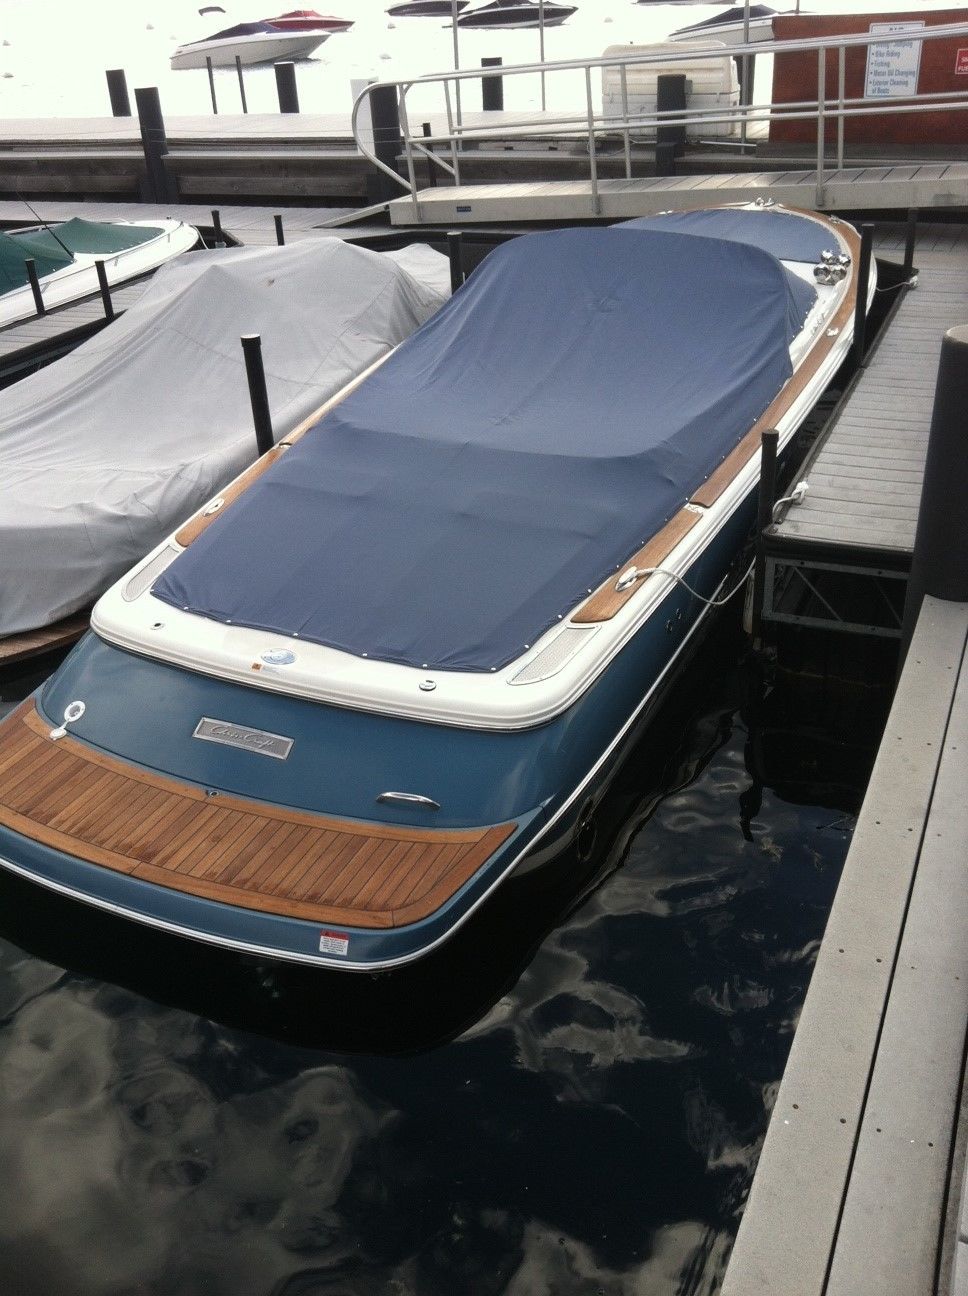 Chris Craft 262 Sport Deck 2000 for sale for $18,995 